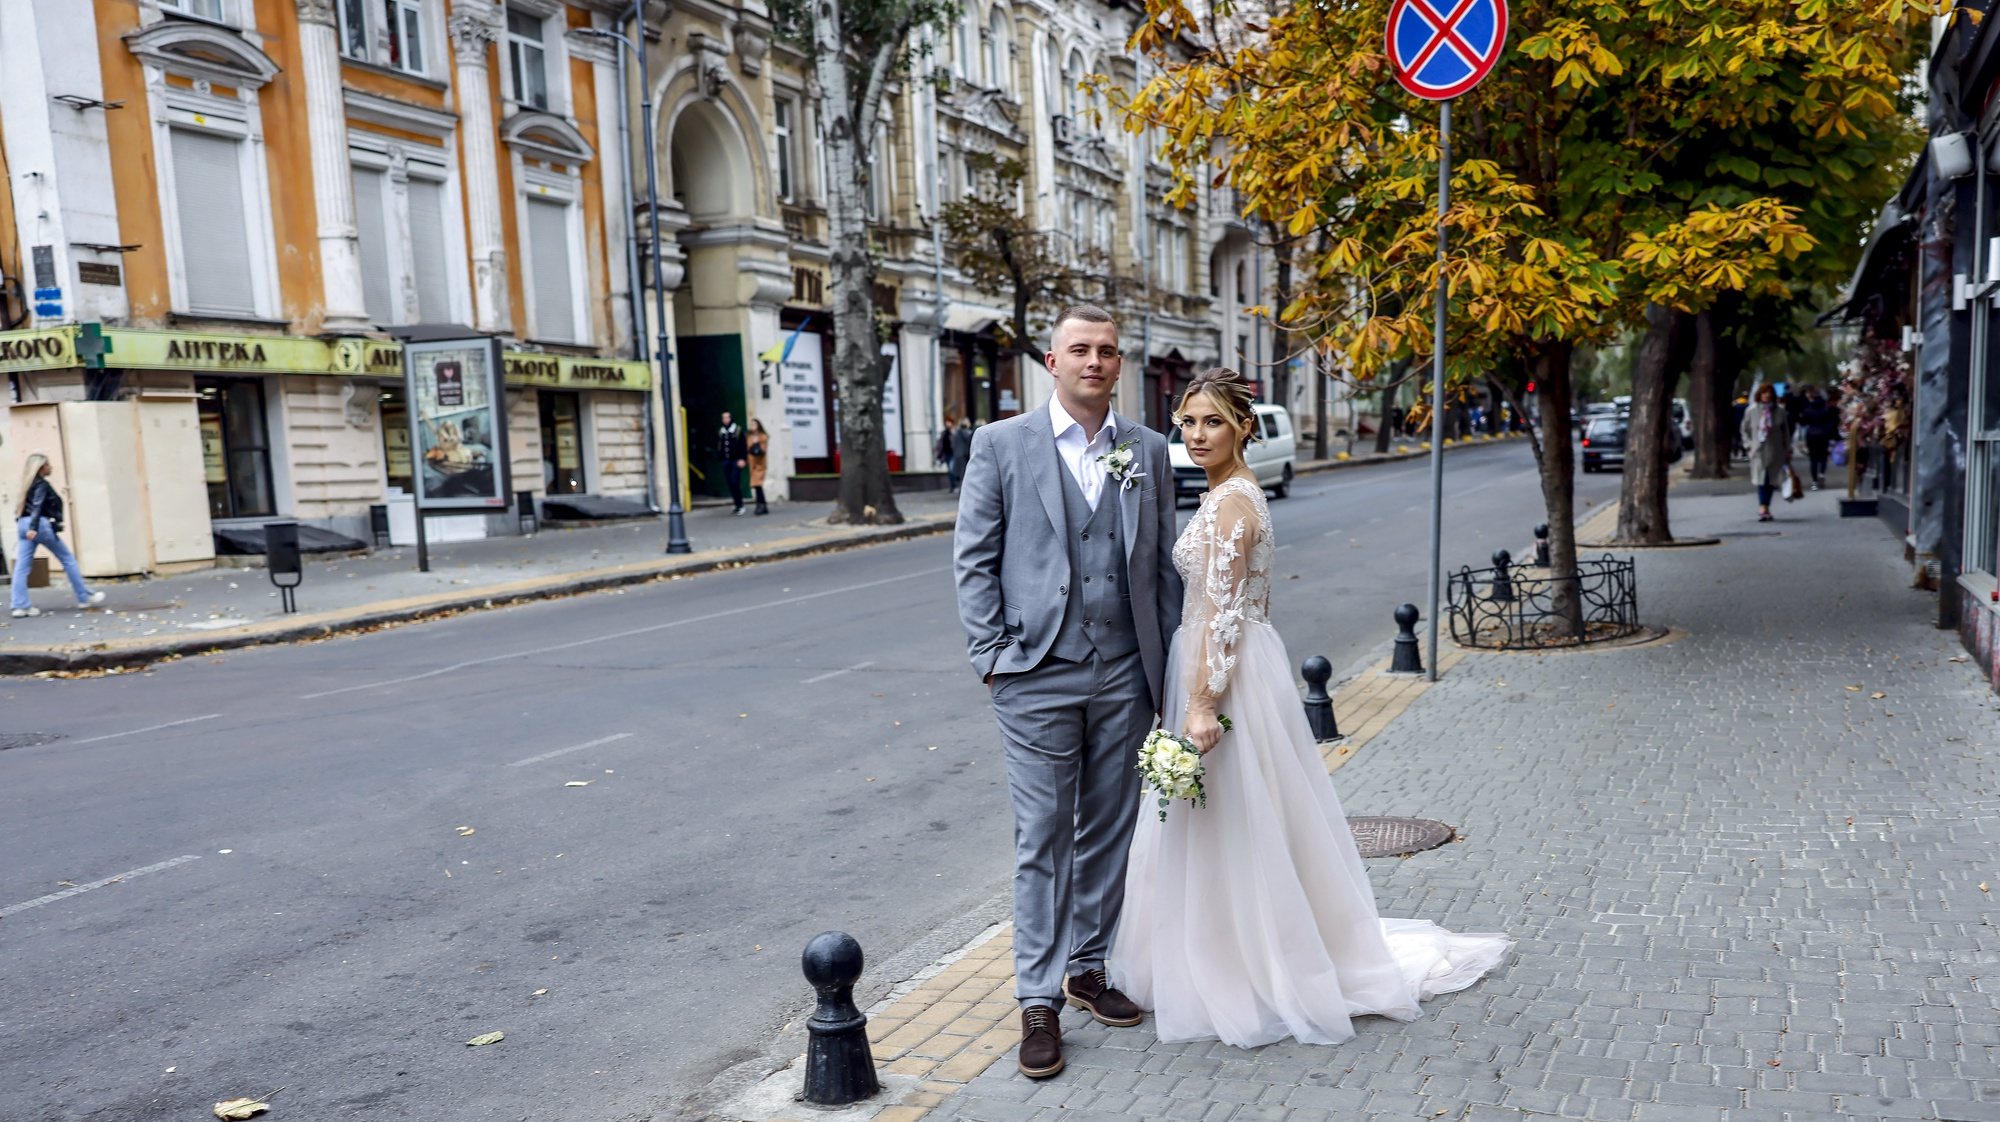 epa10259499 A bridal couple poses for pictures in Odesa, Ukraine, 22 October 2022. Russian troops on 24 February entered Ukrainian territory, starting a conflict that has provoked destruction and a humanitarian crisis.  EPA/HANNIBAL HANSCHKE